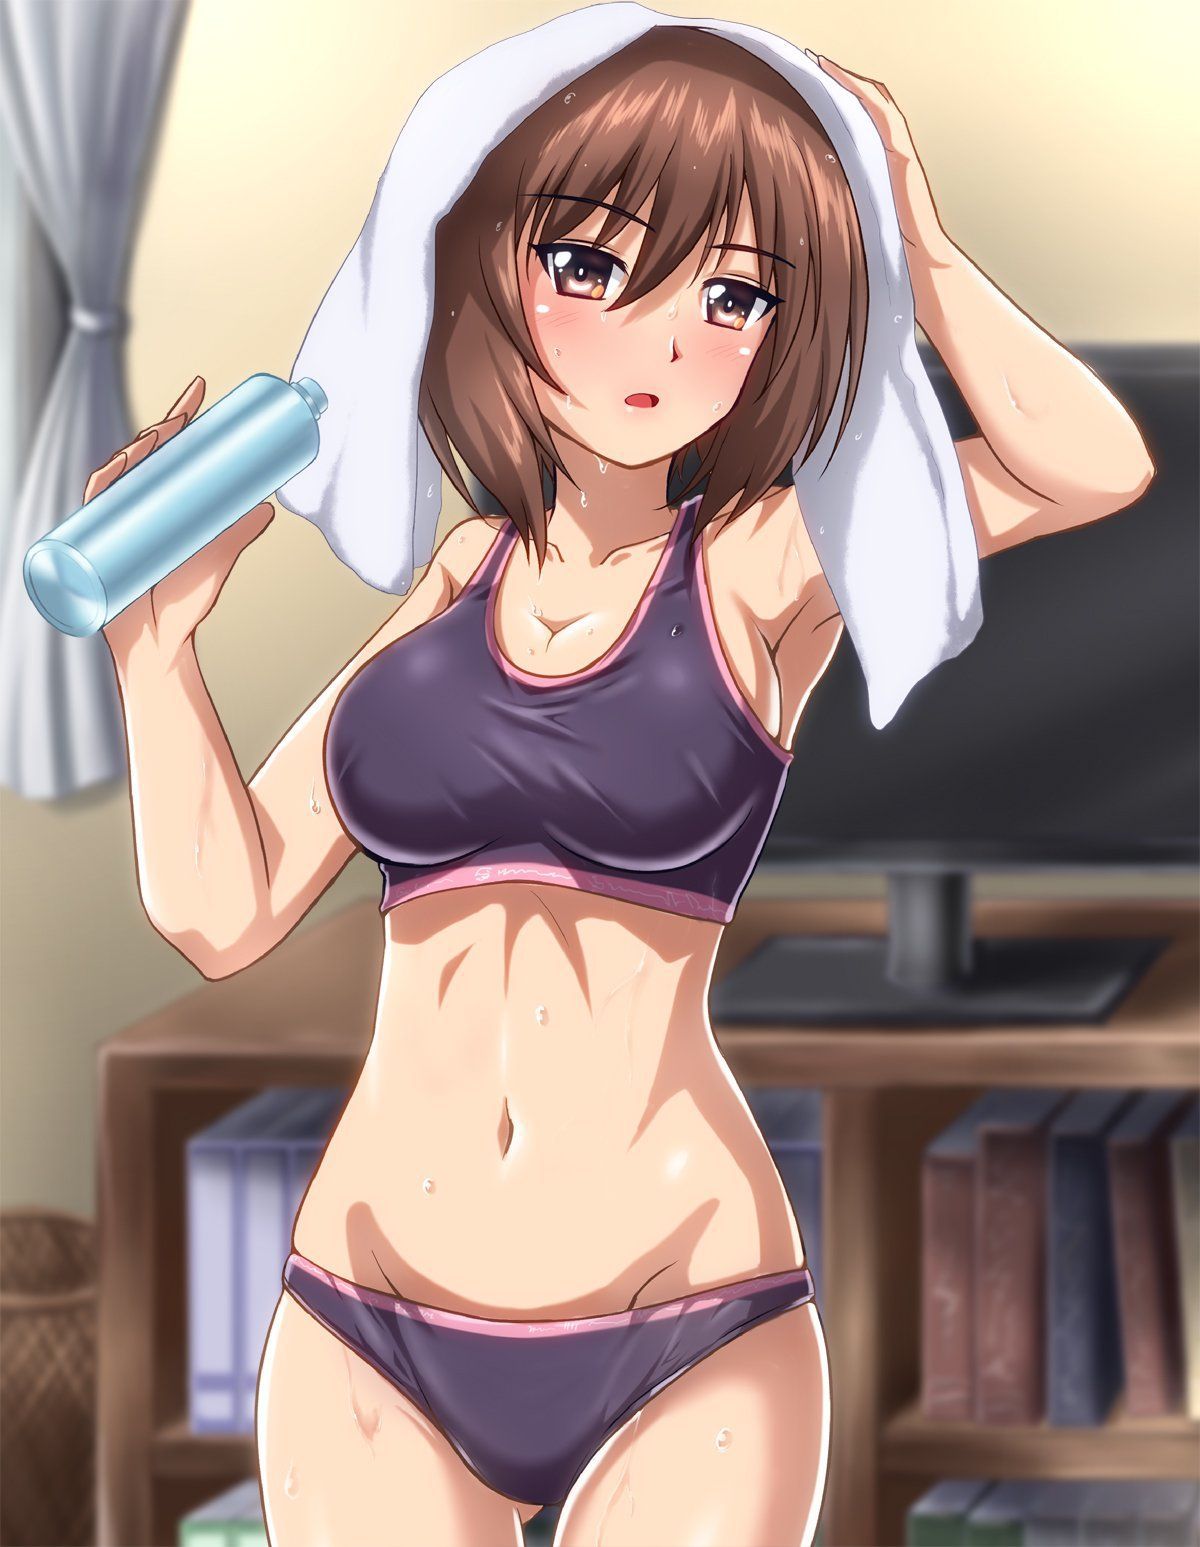 [2nd] The second erotic image of a pretty girl wearing a sports bra [sports bra] 25